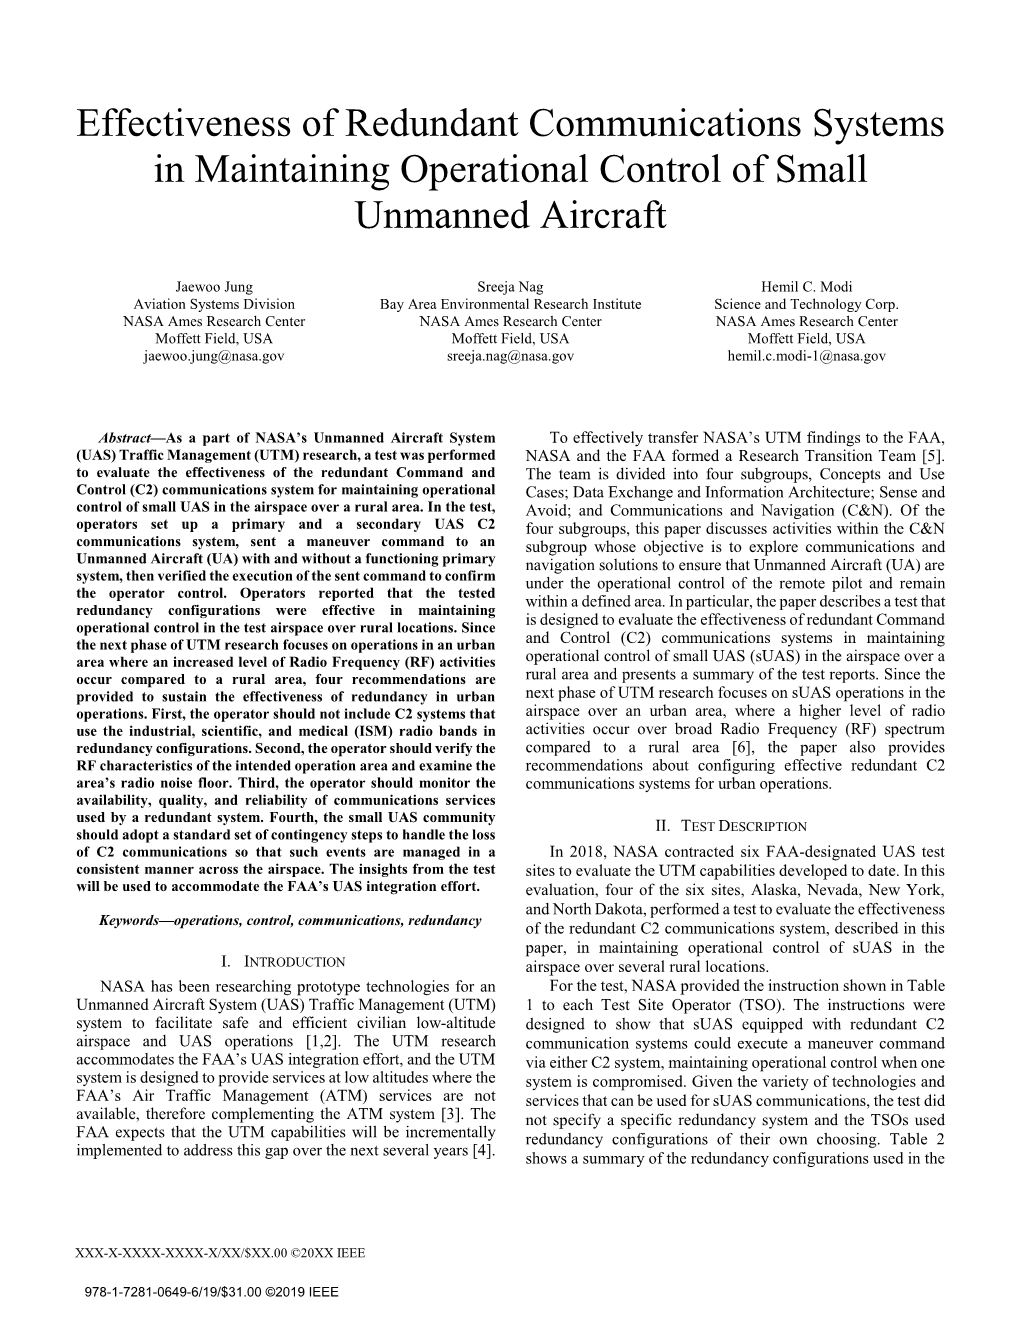 Effectiveness of Redundant Communications Systems in Maintaining Operational Control of Small